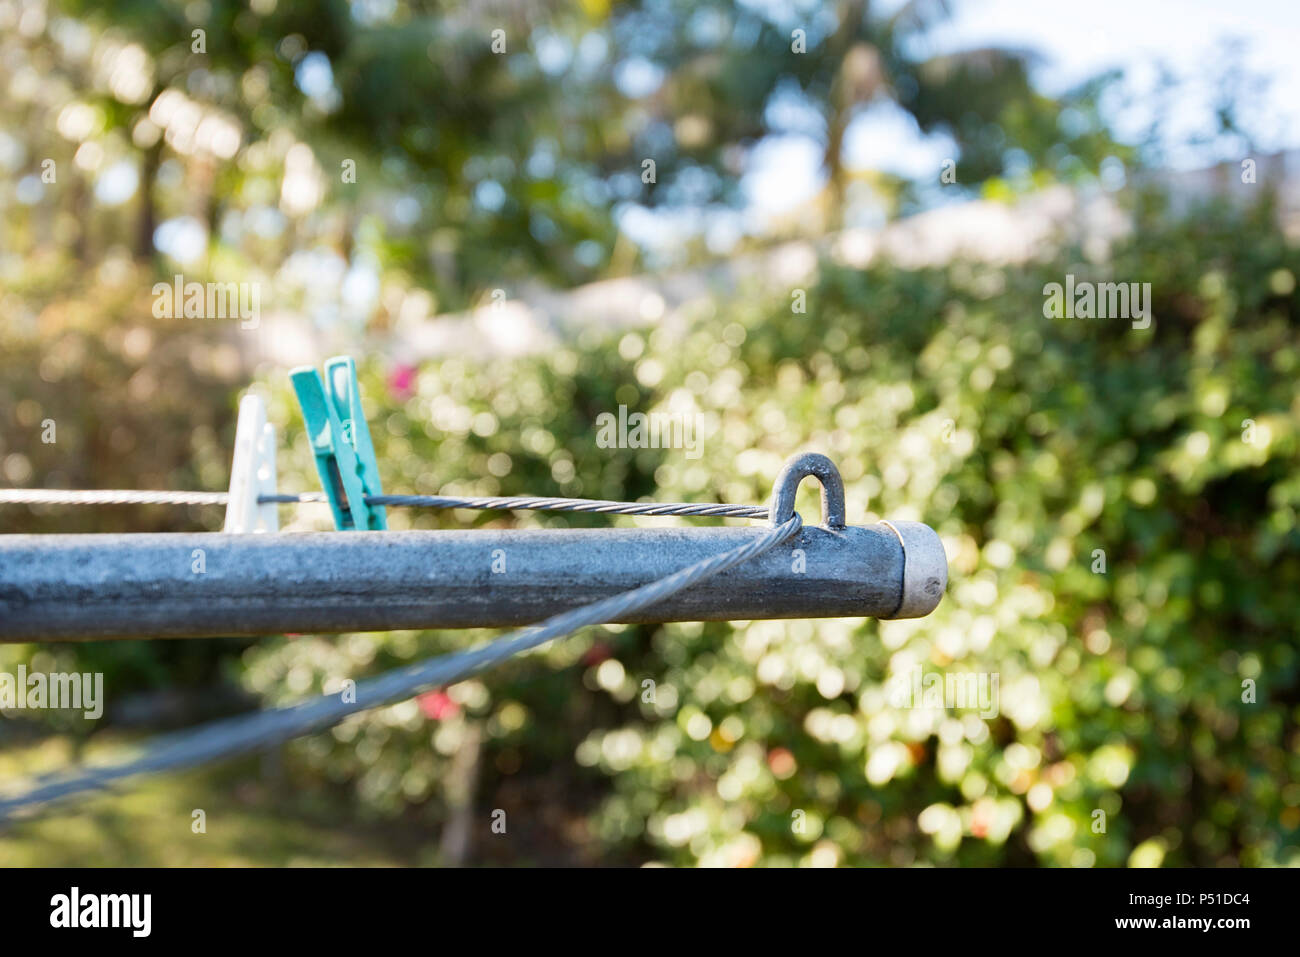 A partial view of the wire line and wing or arm of a 1960s Hills Hoist clothes drying line with clothes pegs in a backyard in Australia Stock Photo